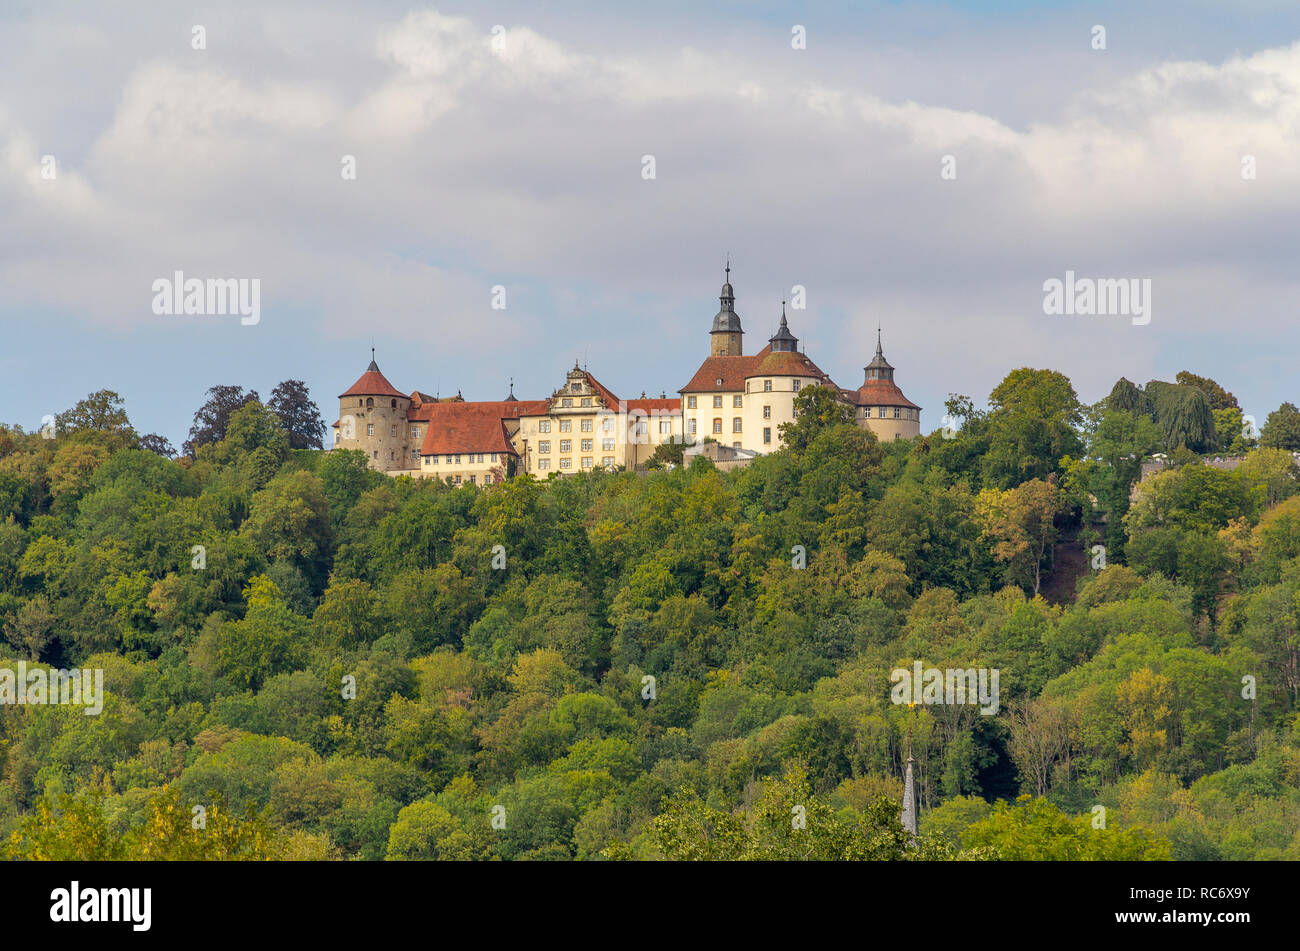 Langenburg Castle in Southern Germany at summer time Stock Photo